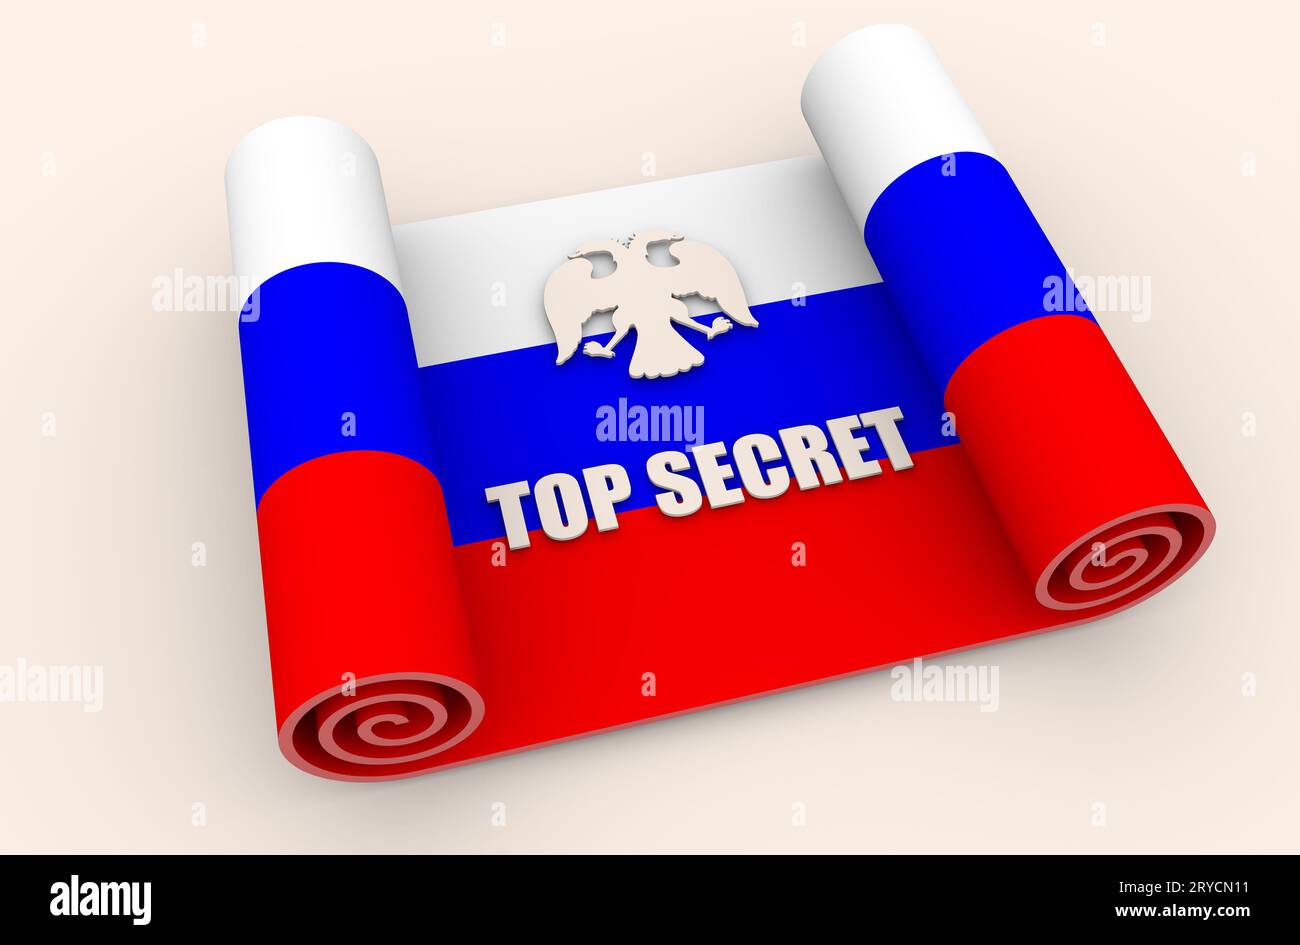 Top secret text on paper scroll textured by Russian flag Stock Photo